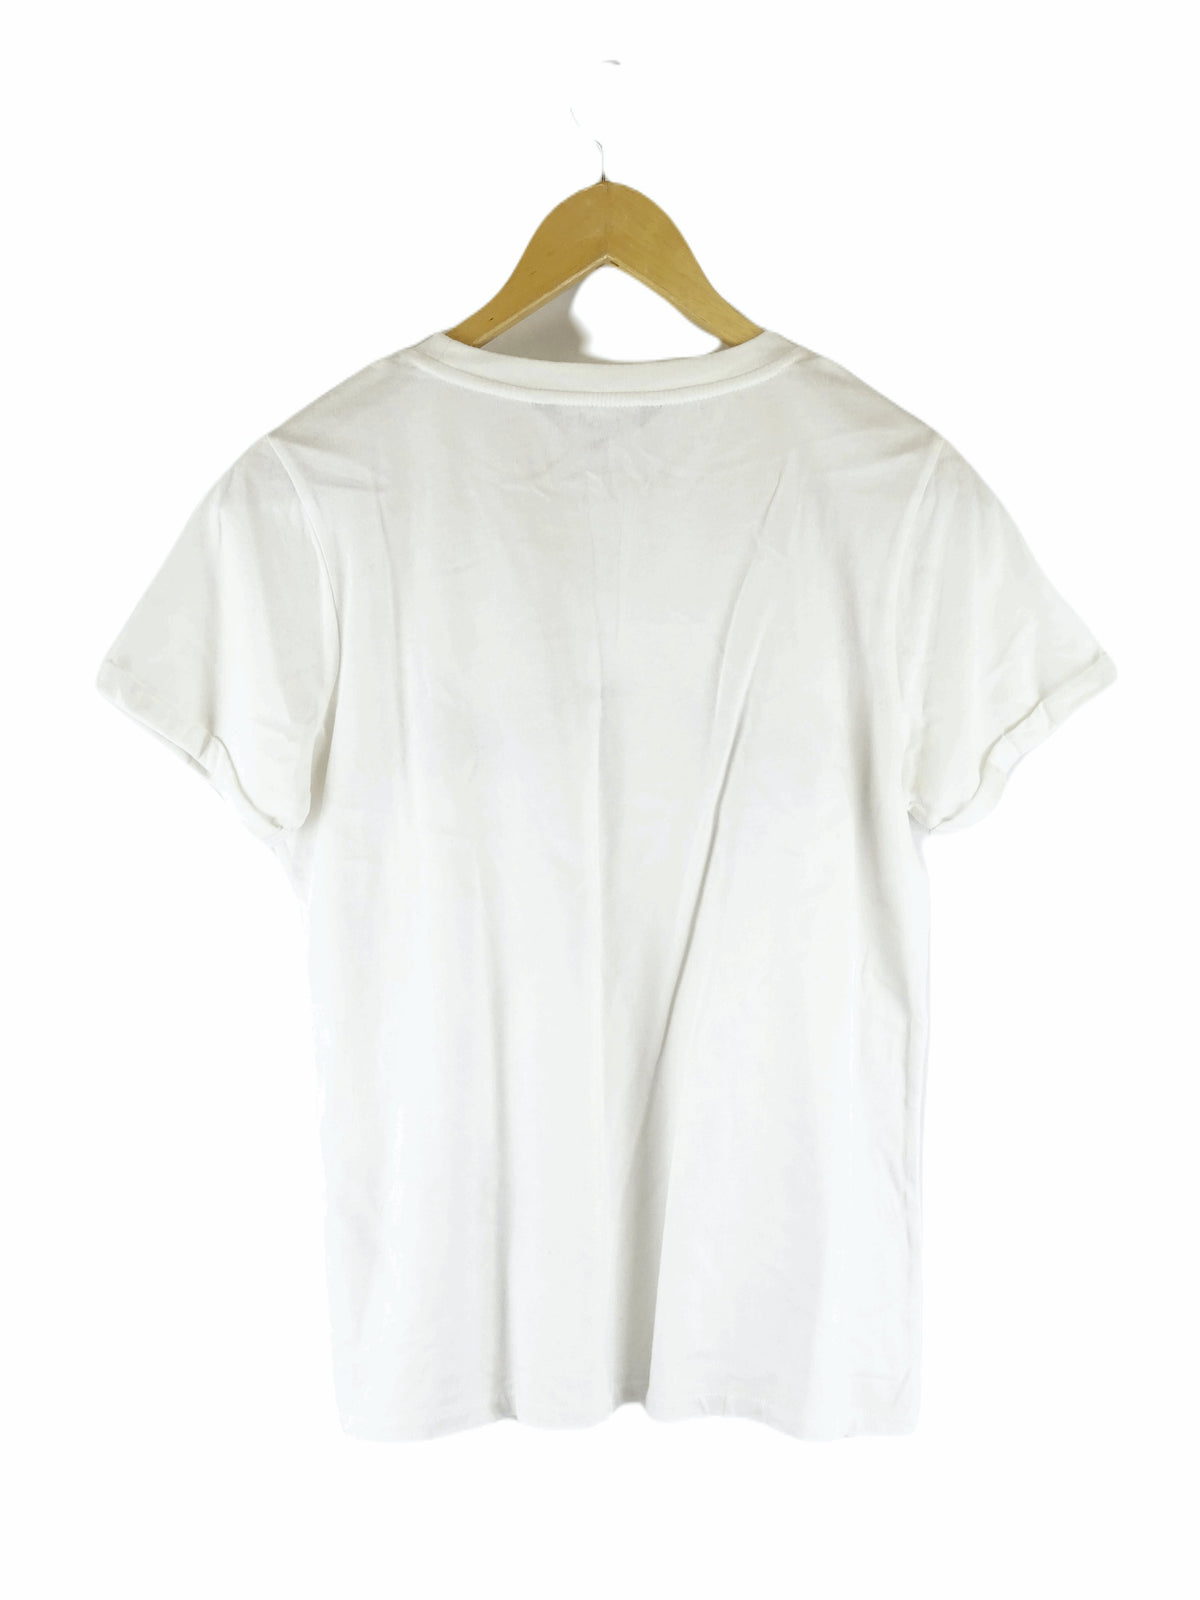 French Connection White T-Shirt XS